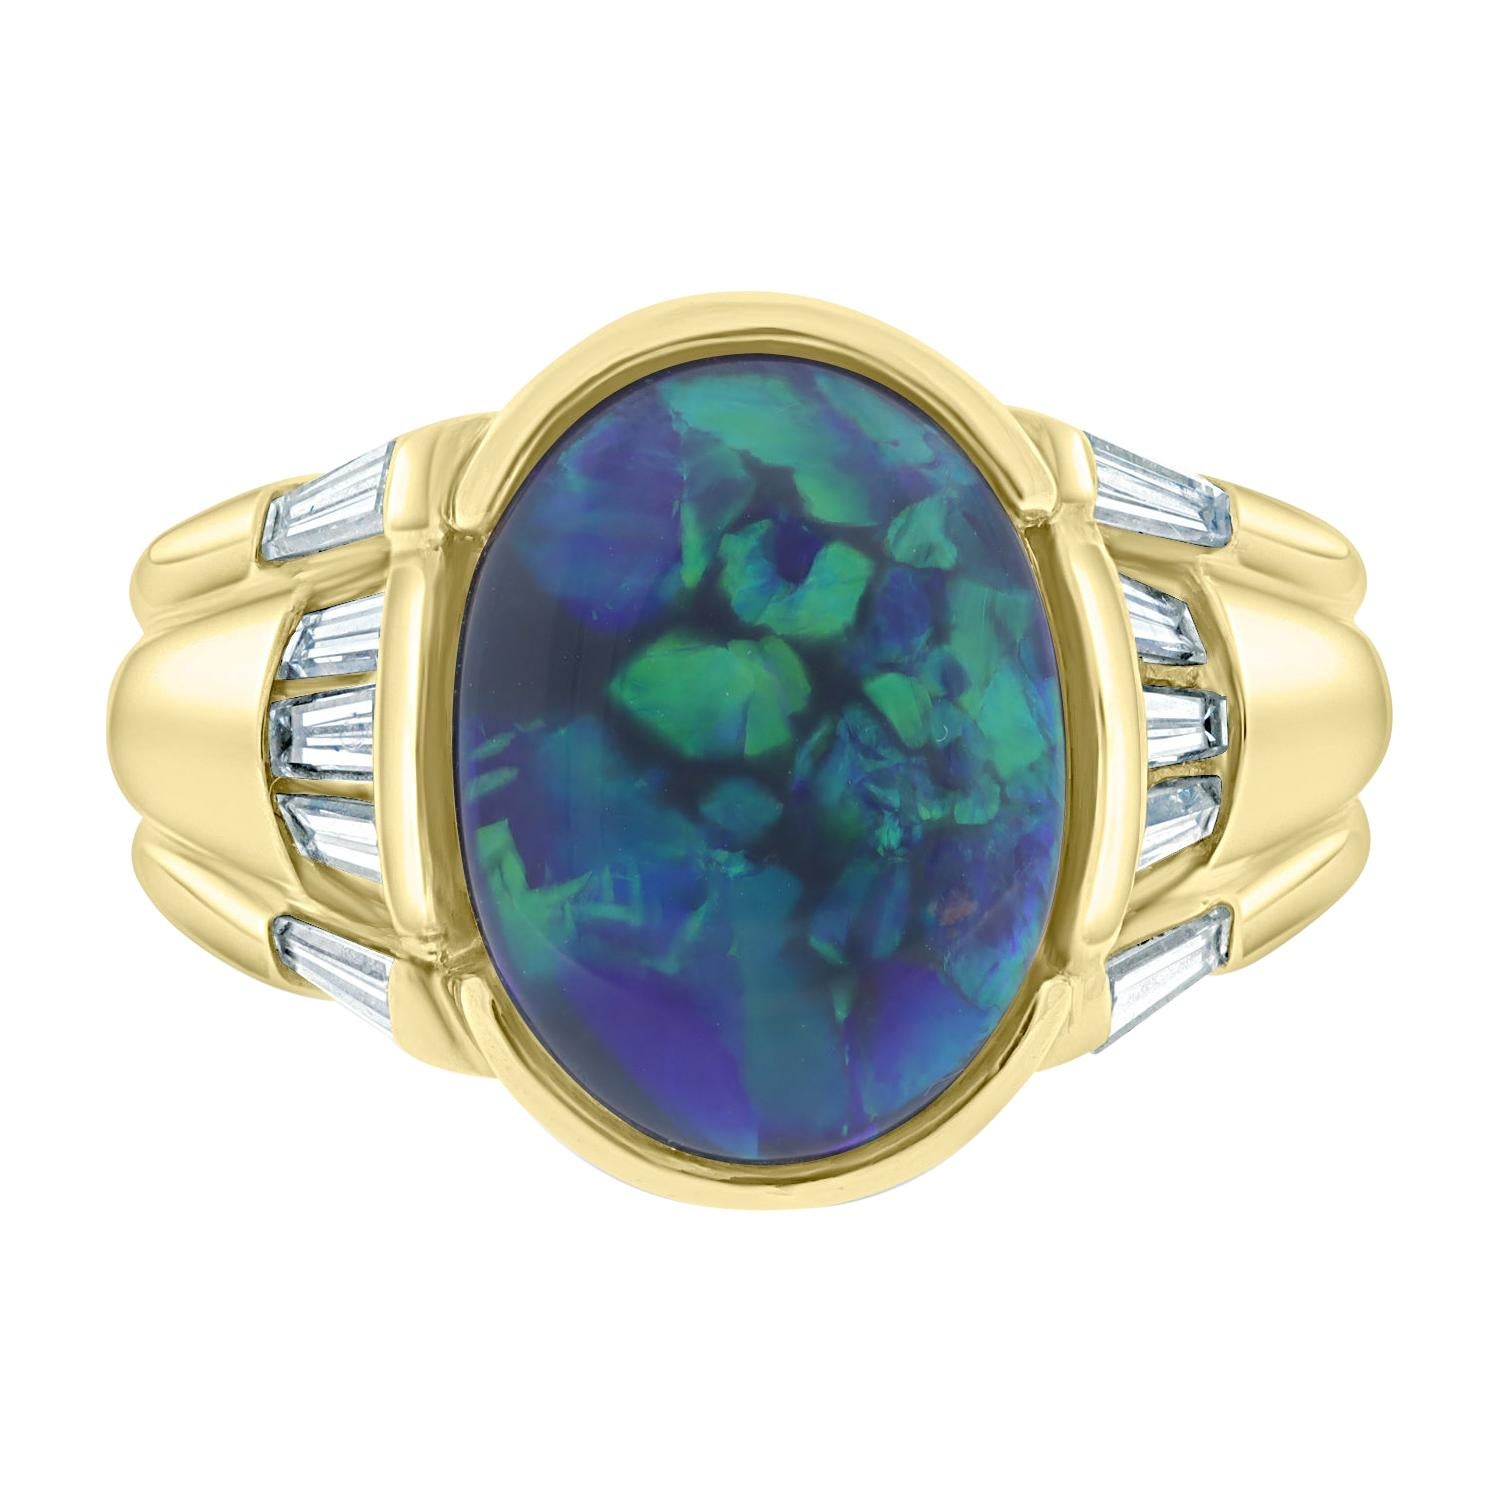 4.62ct Black Opal Ring with 0.69tct Diamonds Set in 18k Yellow Gold